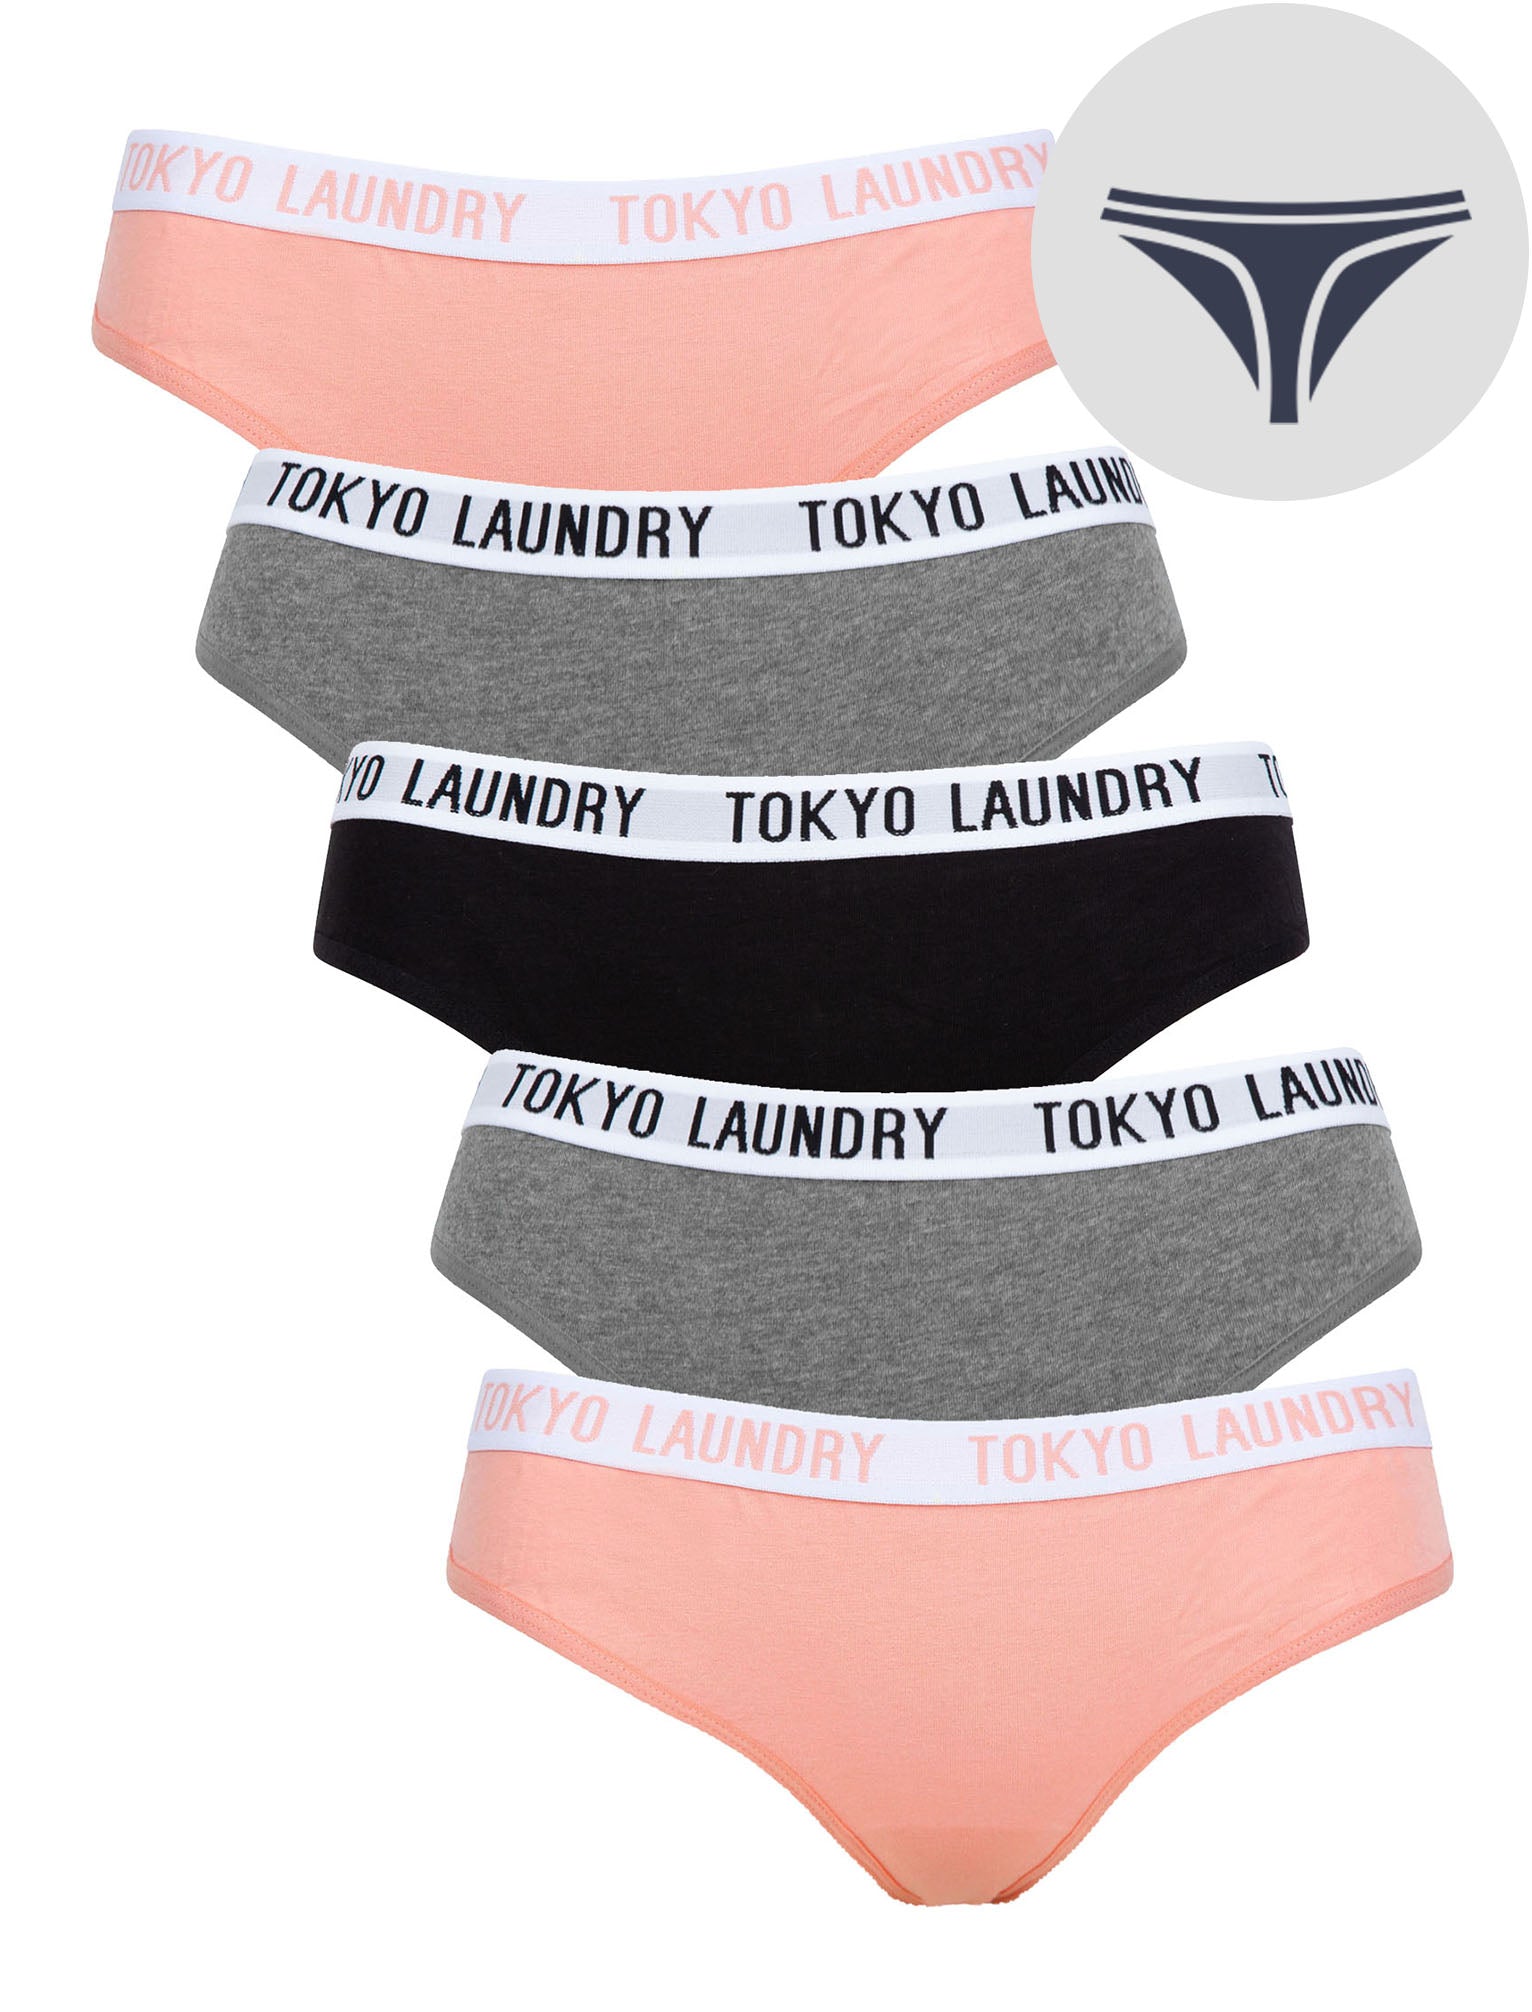 Womens Underwear Milla (5 Pack) Cotton Assorted Thongs in Bridal Rose / Mid Grey Marl / Jet Black - Tokyo Laundry / L - Tokyo Laundry